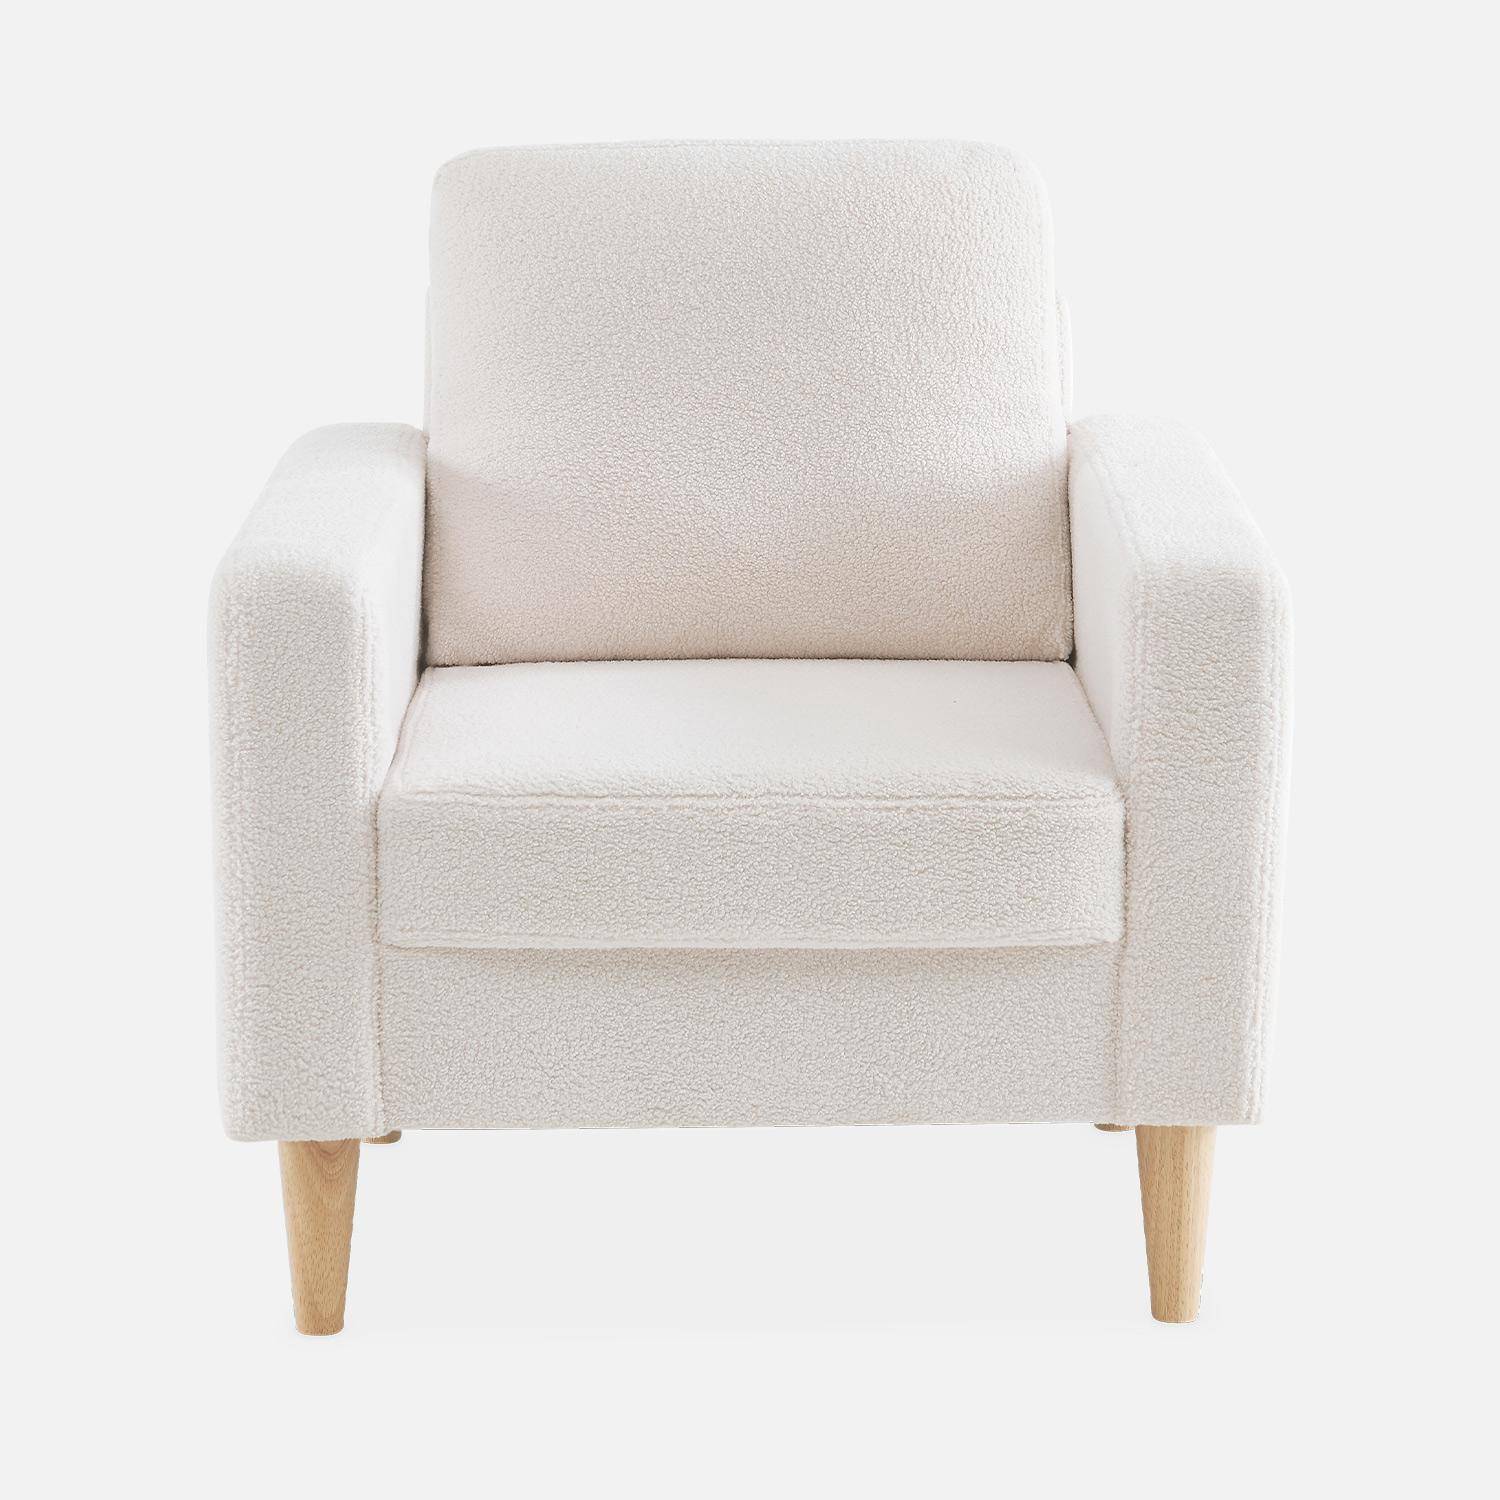 Scandi-style armchair with wooden legs - Bjorn - white boucle,sweeek,Photo4